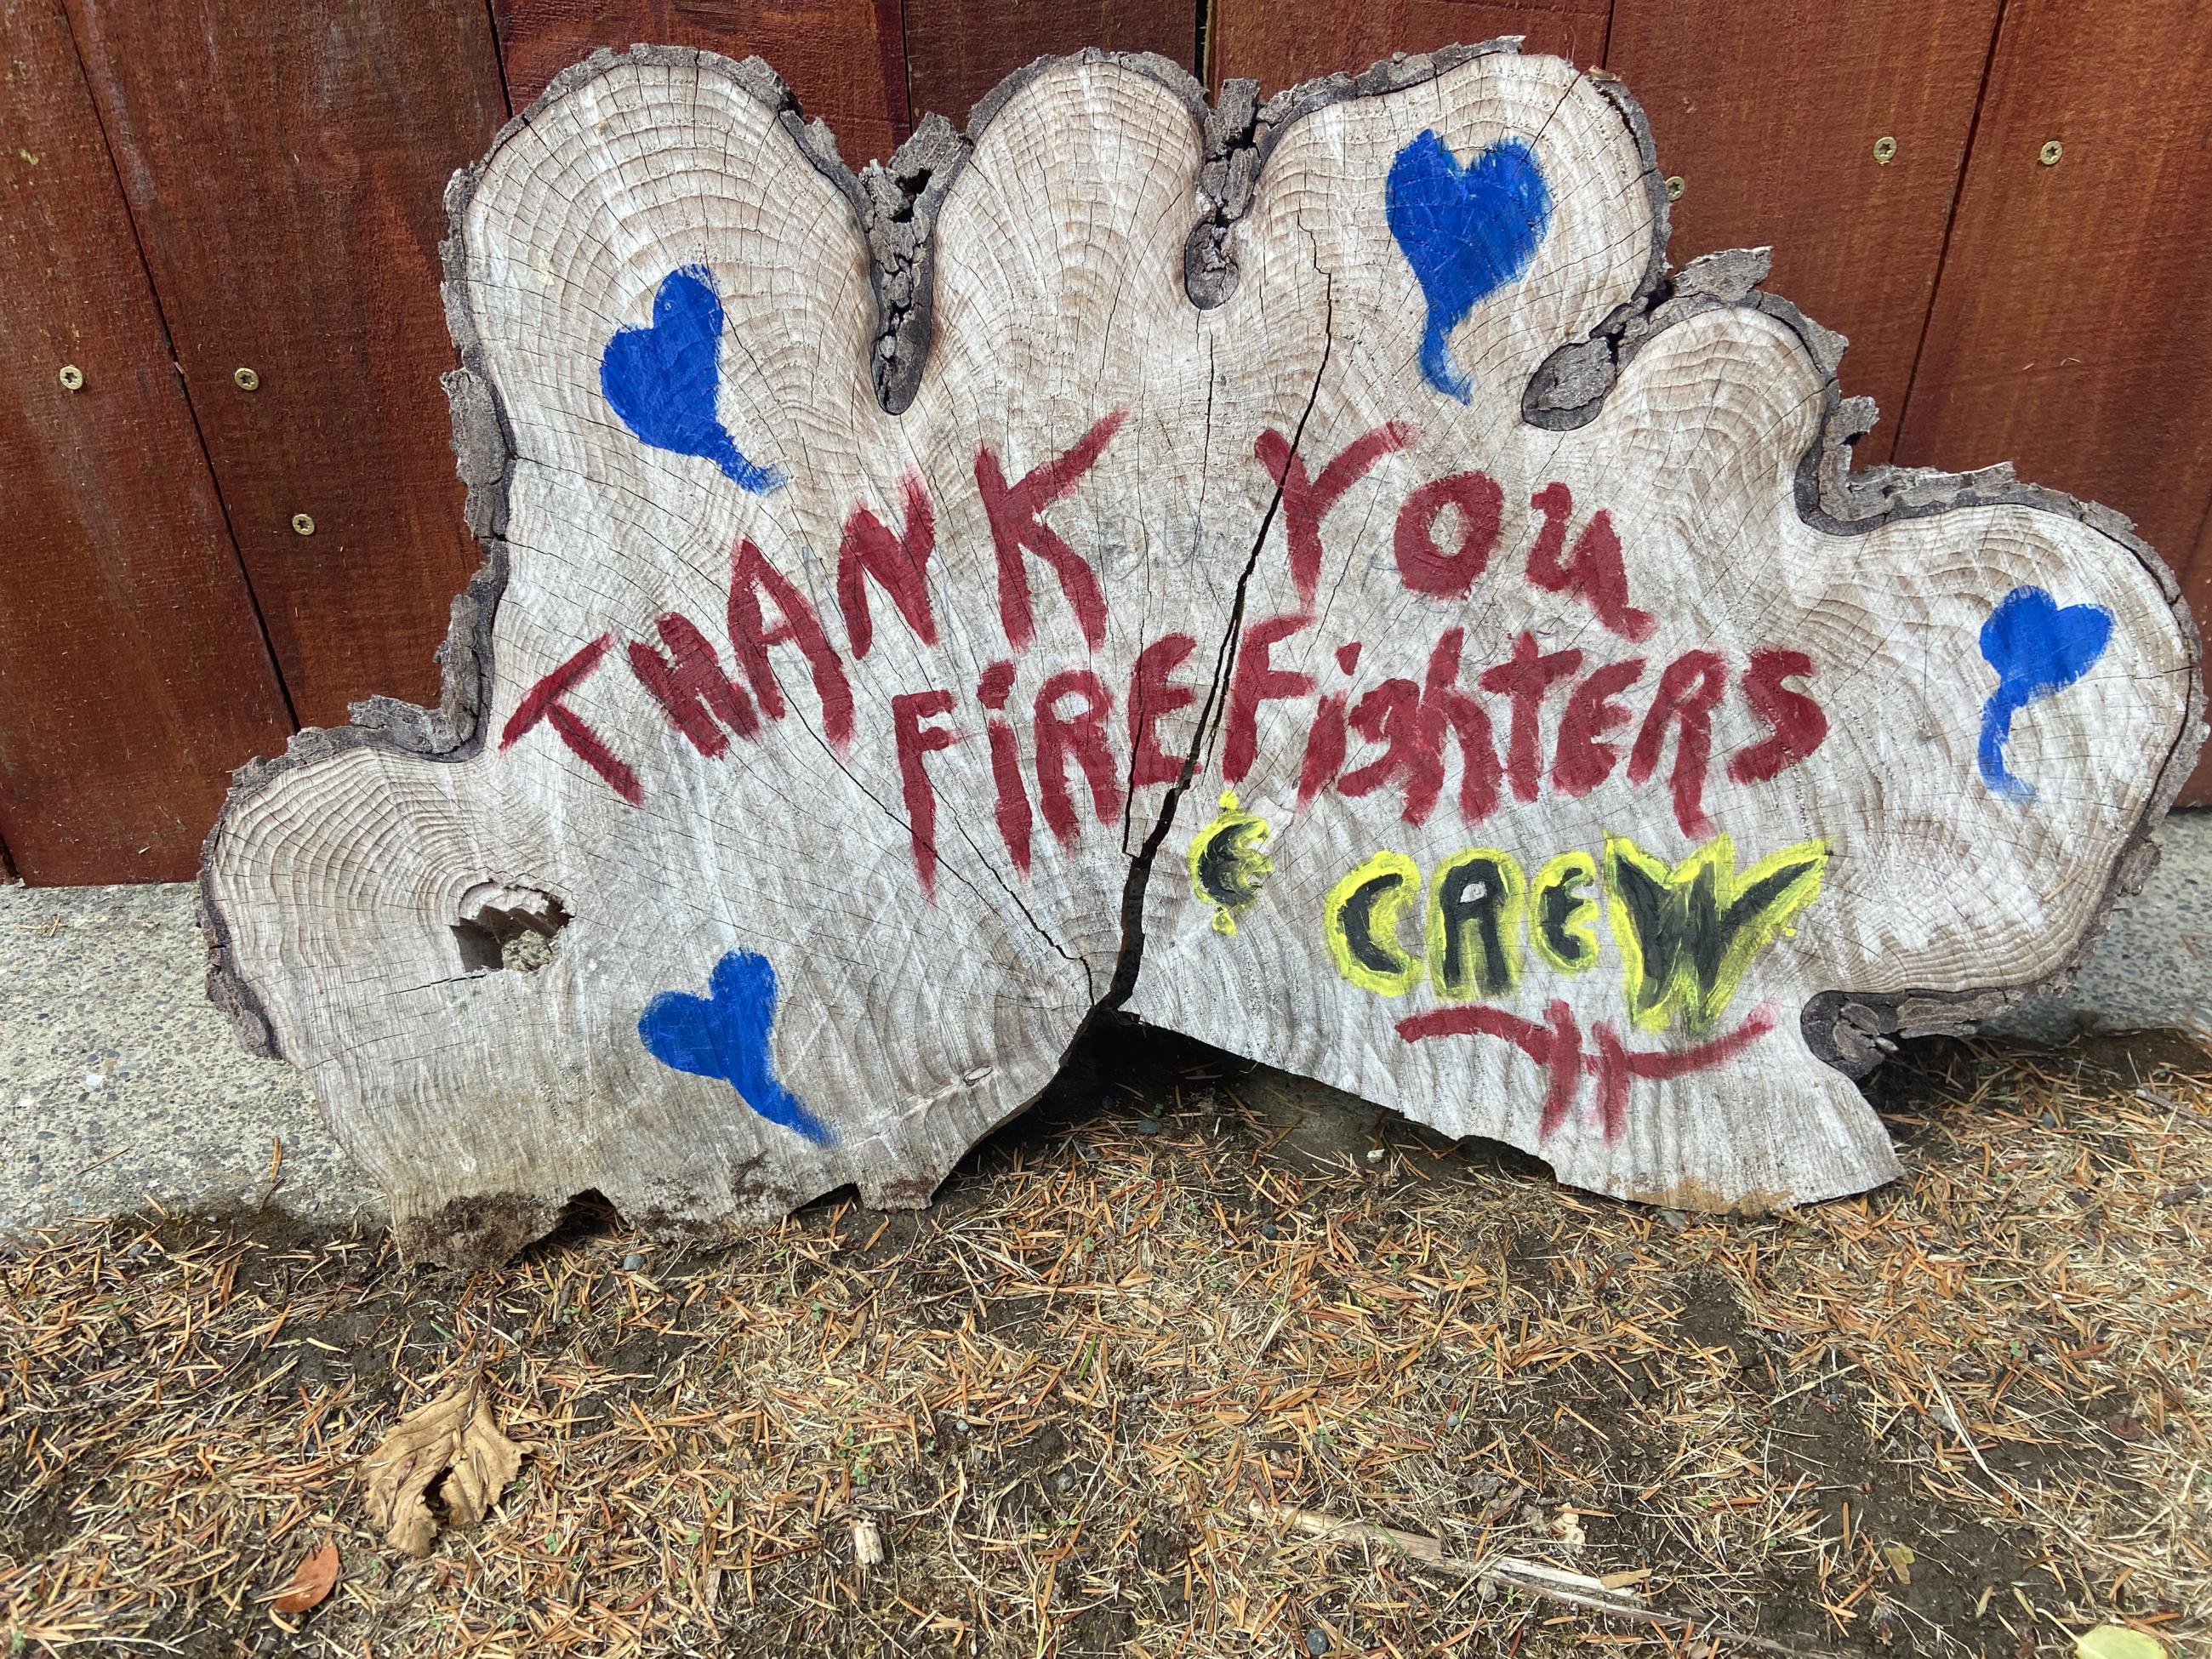 Piece of wood painted to say thank your firefighters in red with blue hearts